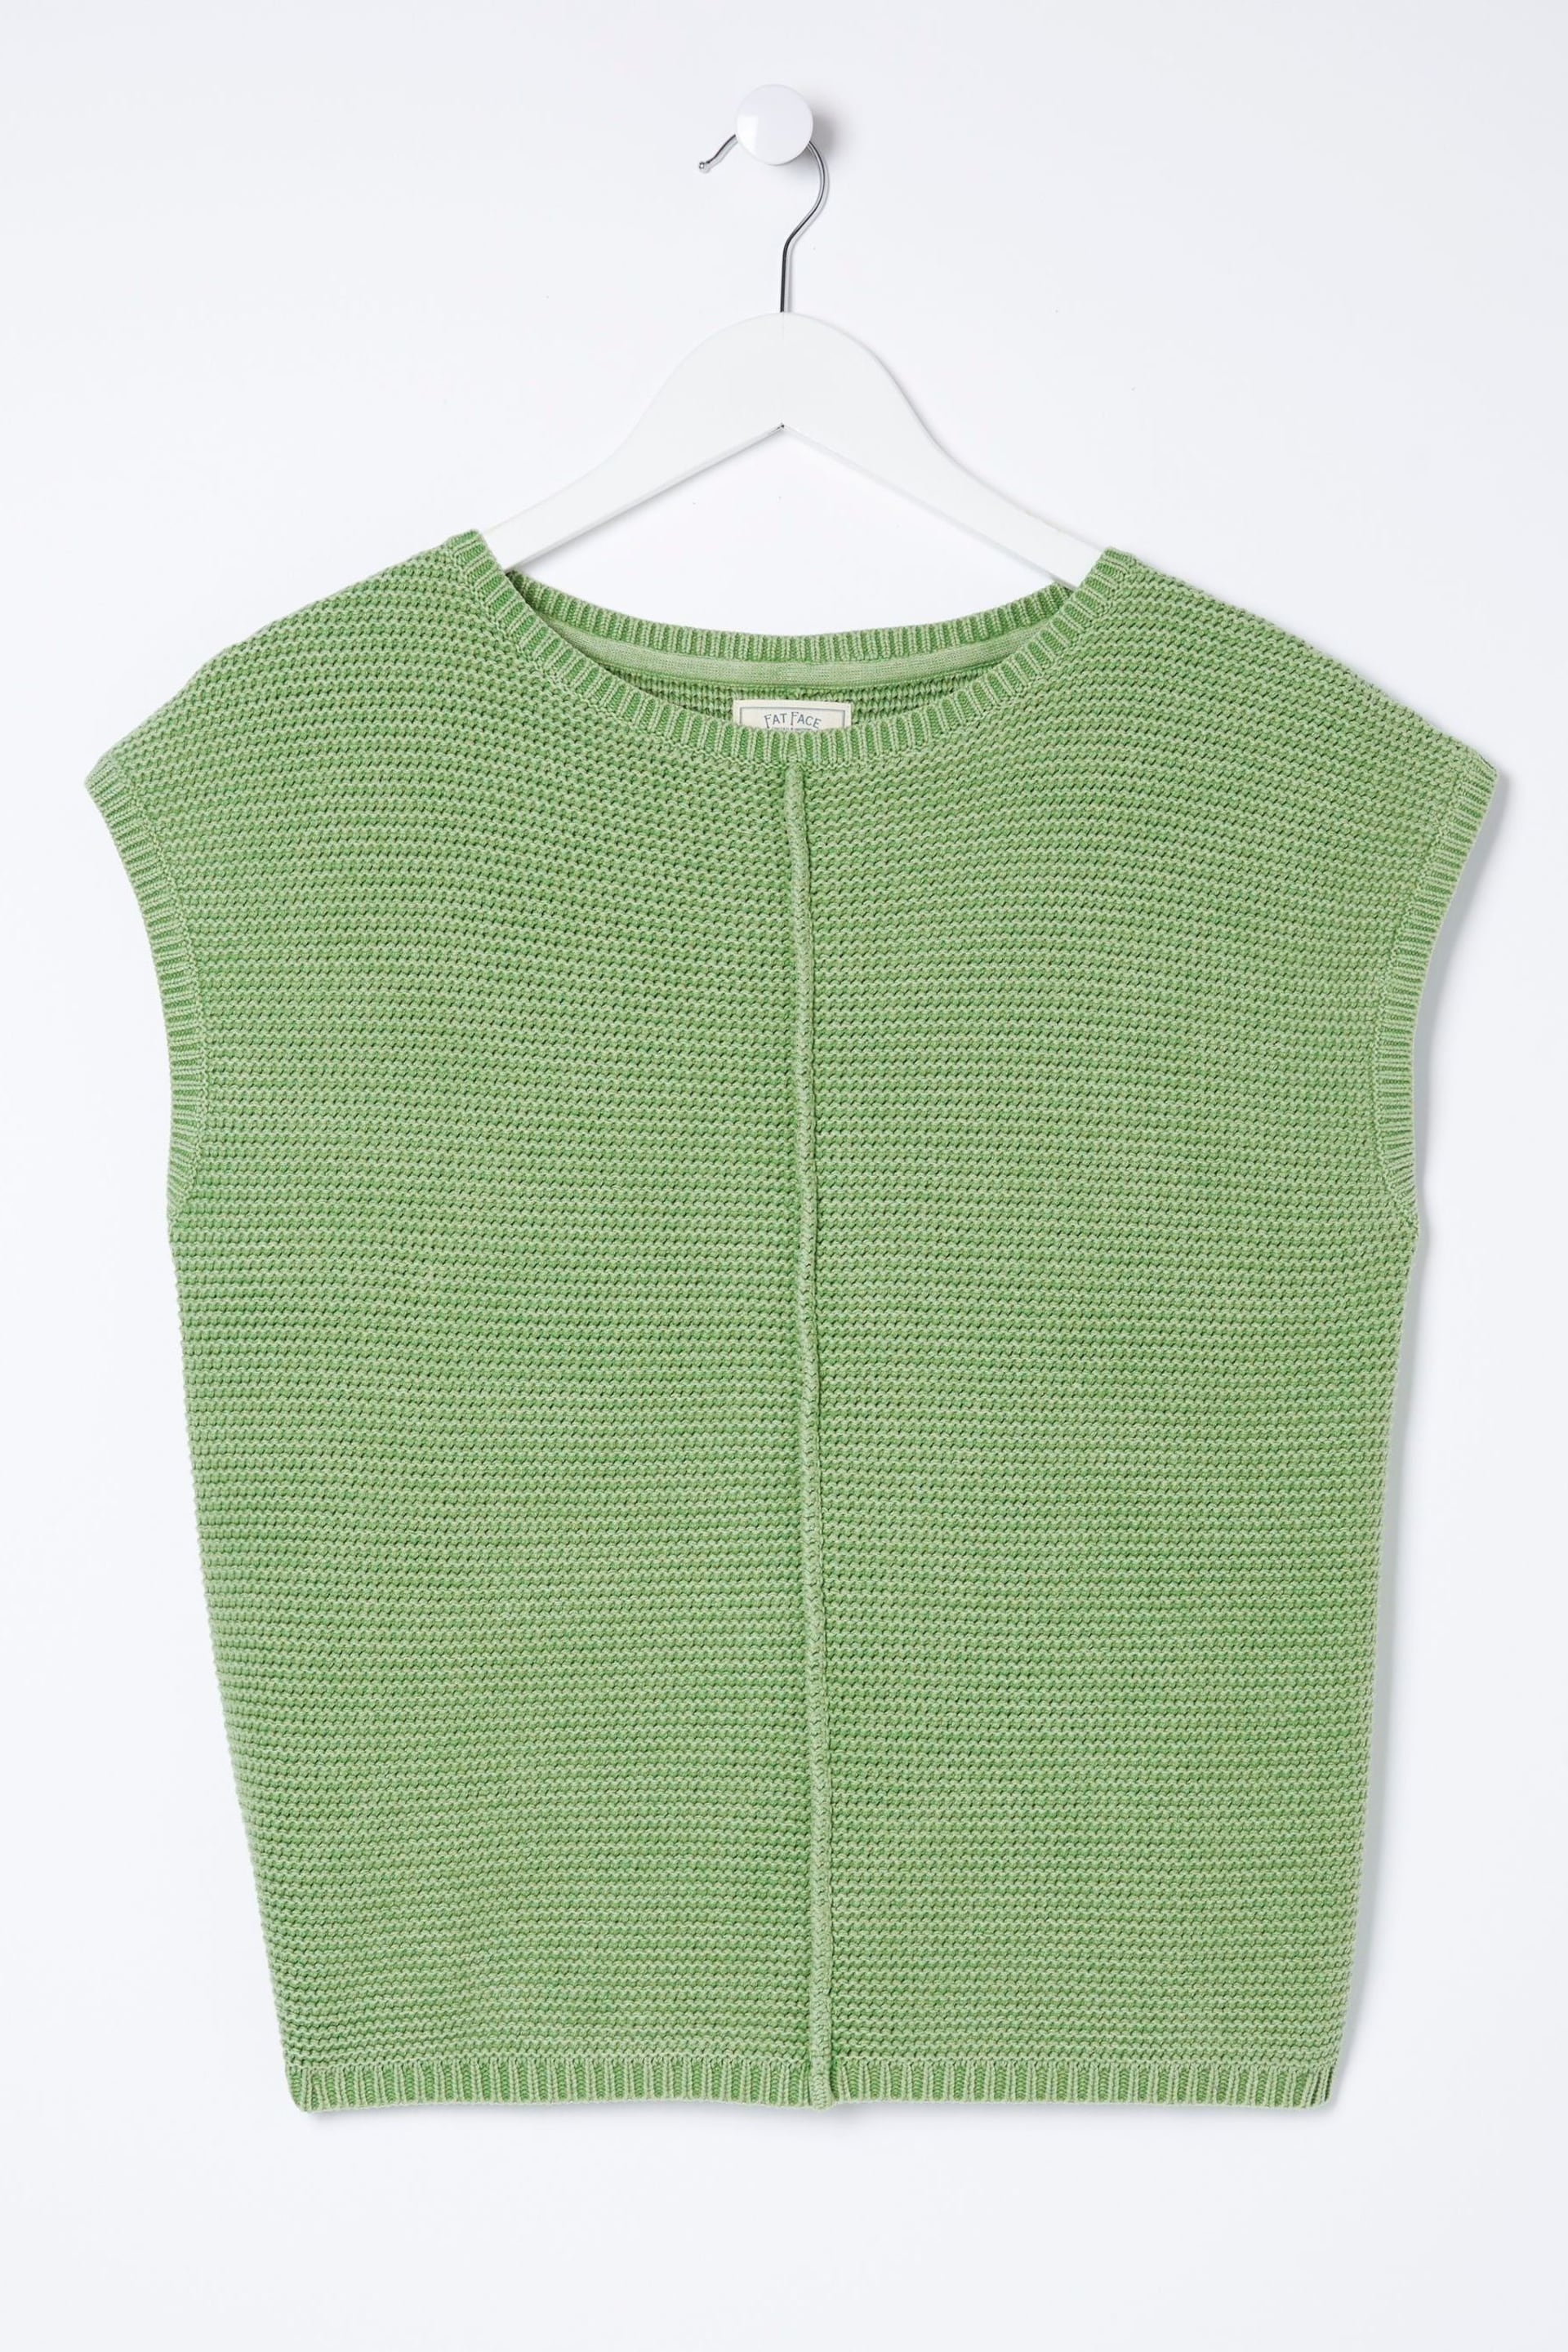 FatFace Green Knitted Crew Jumper - Image 4 of 4